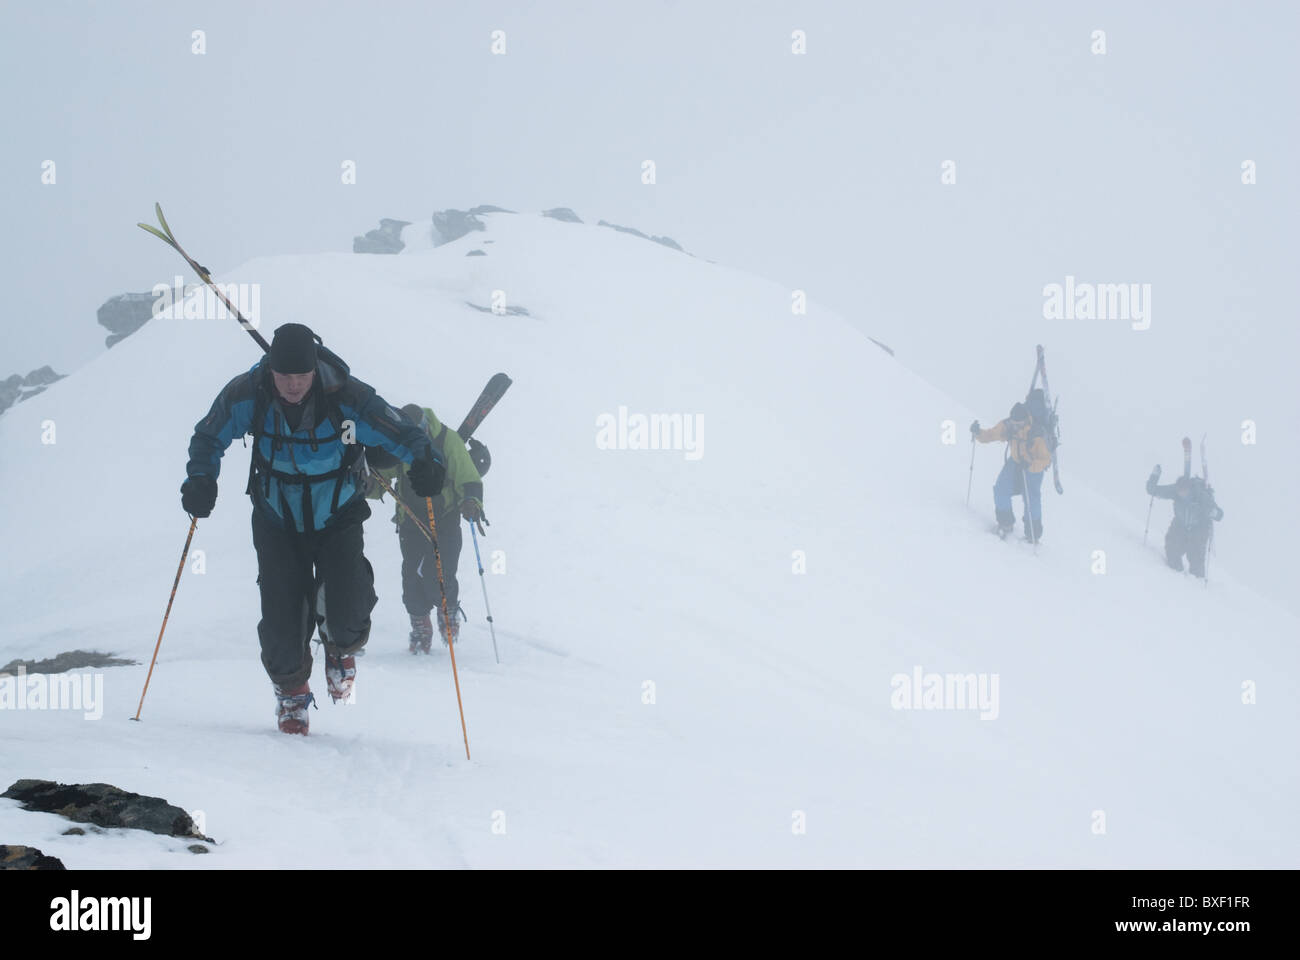 Four free skiers climbing up a snowy mountain side in Lyngen, Norway Stock Photo